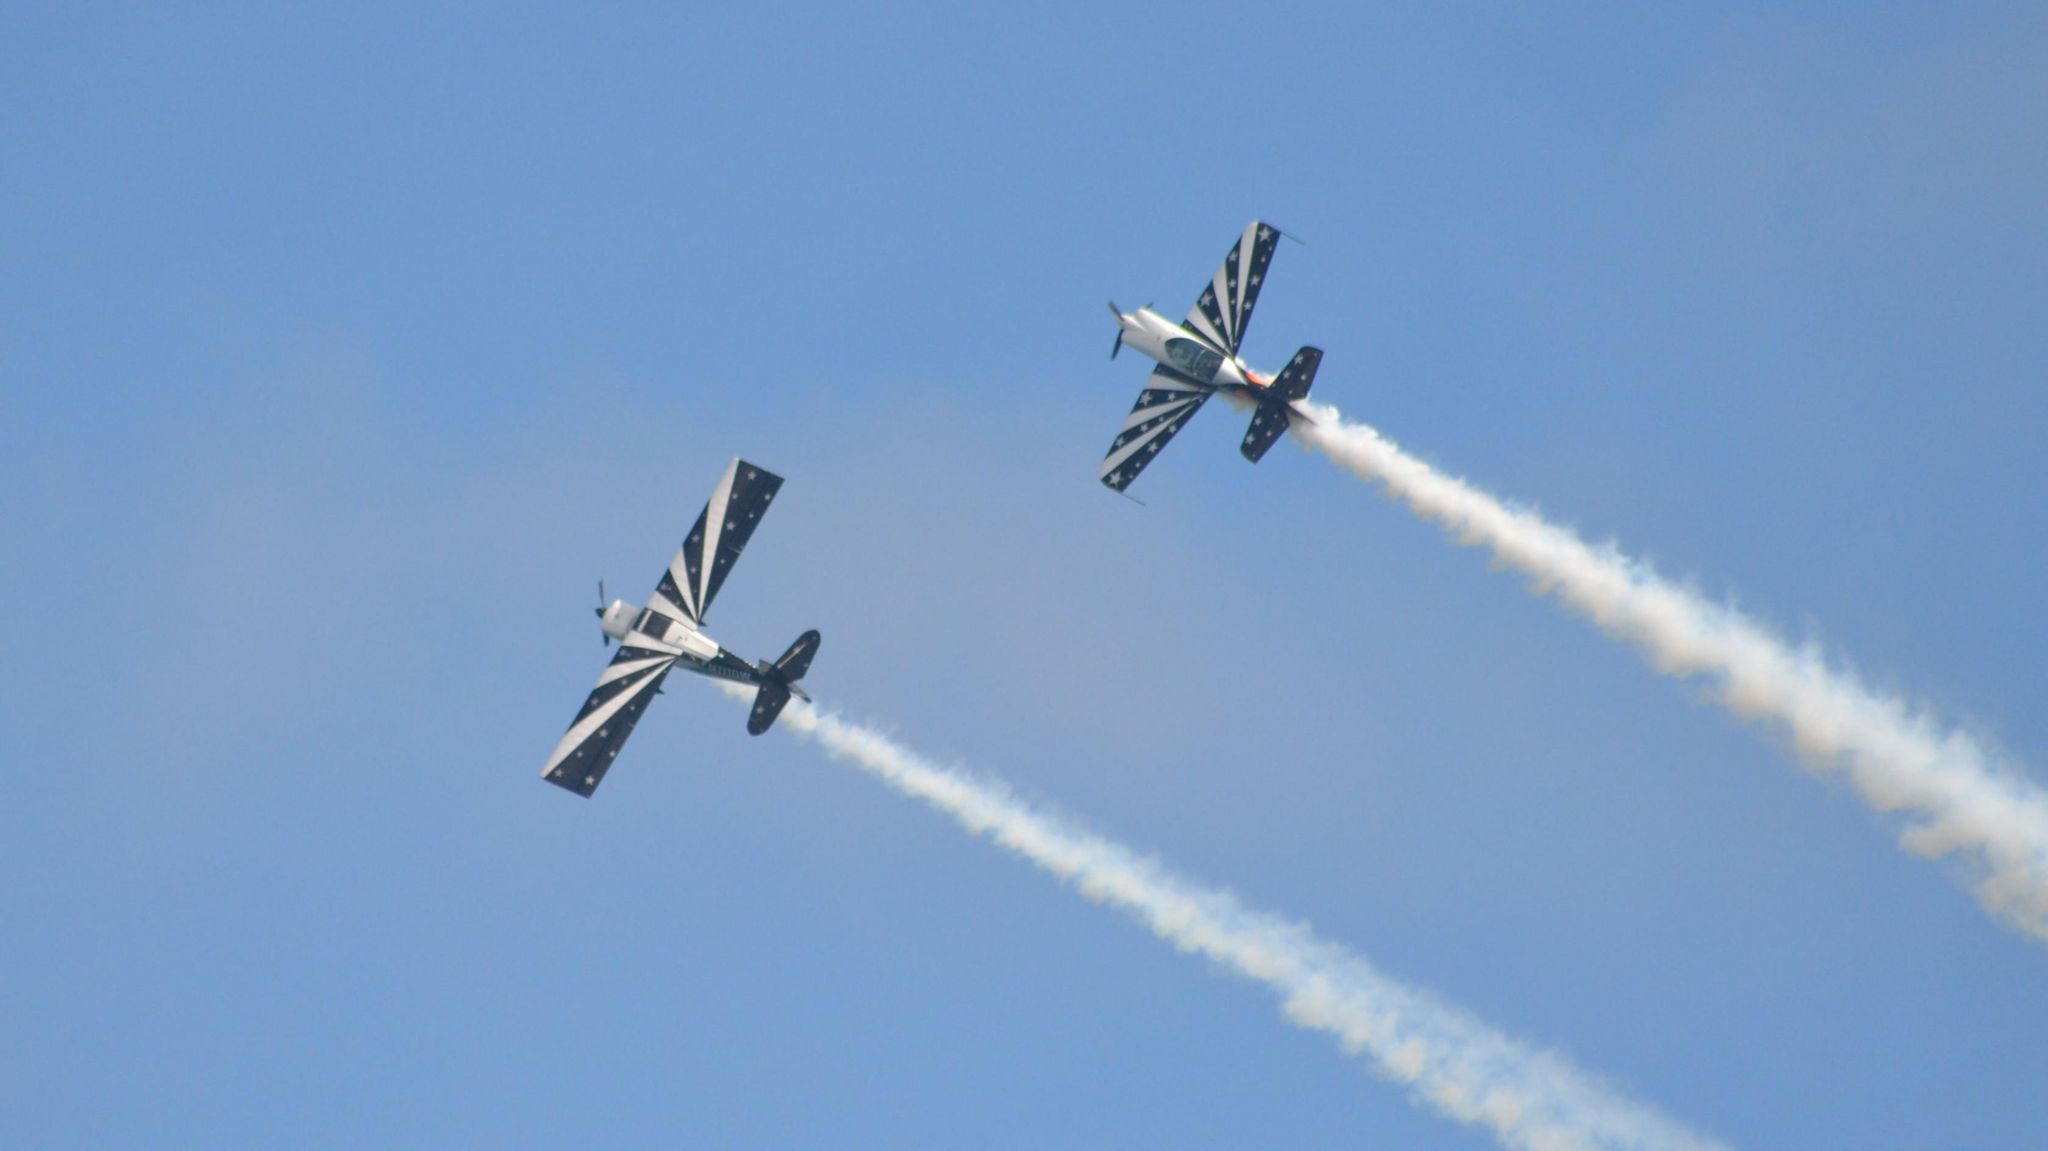 The Titans in the Guernsey Air Display 